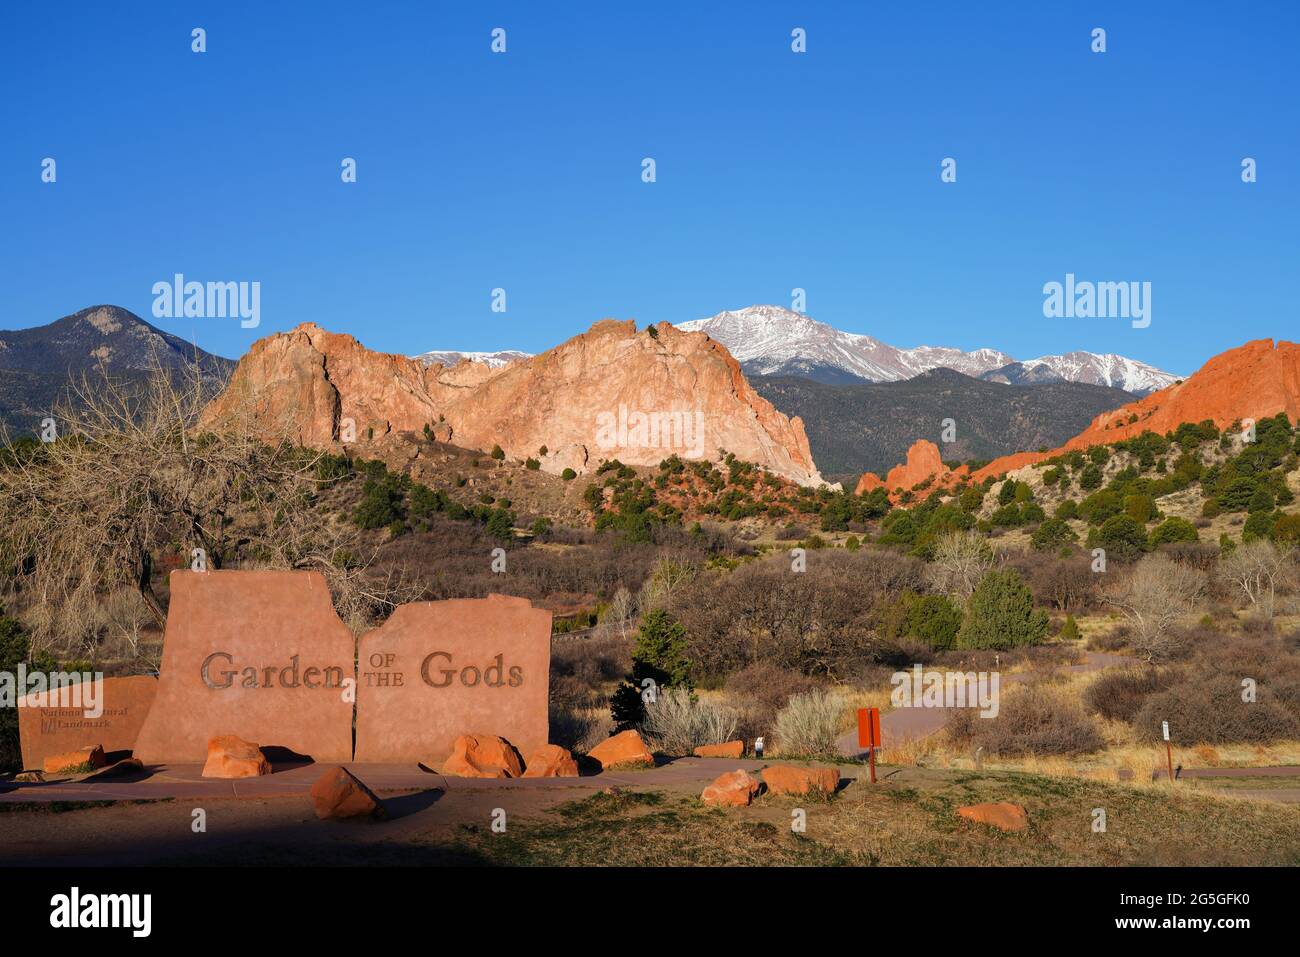 COLORADO SPRINGS, CO- 10 APR 2021- View of the Garden of the Gods red rock park in Colorado Springs, Colorado, United States Stock Photo